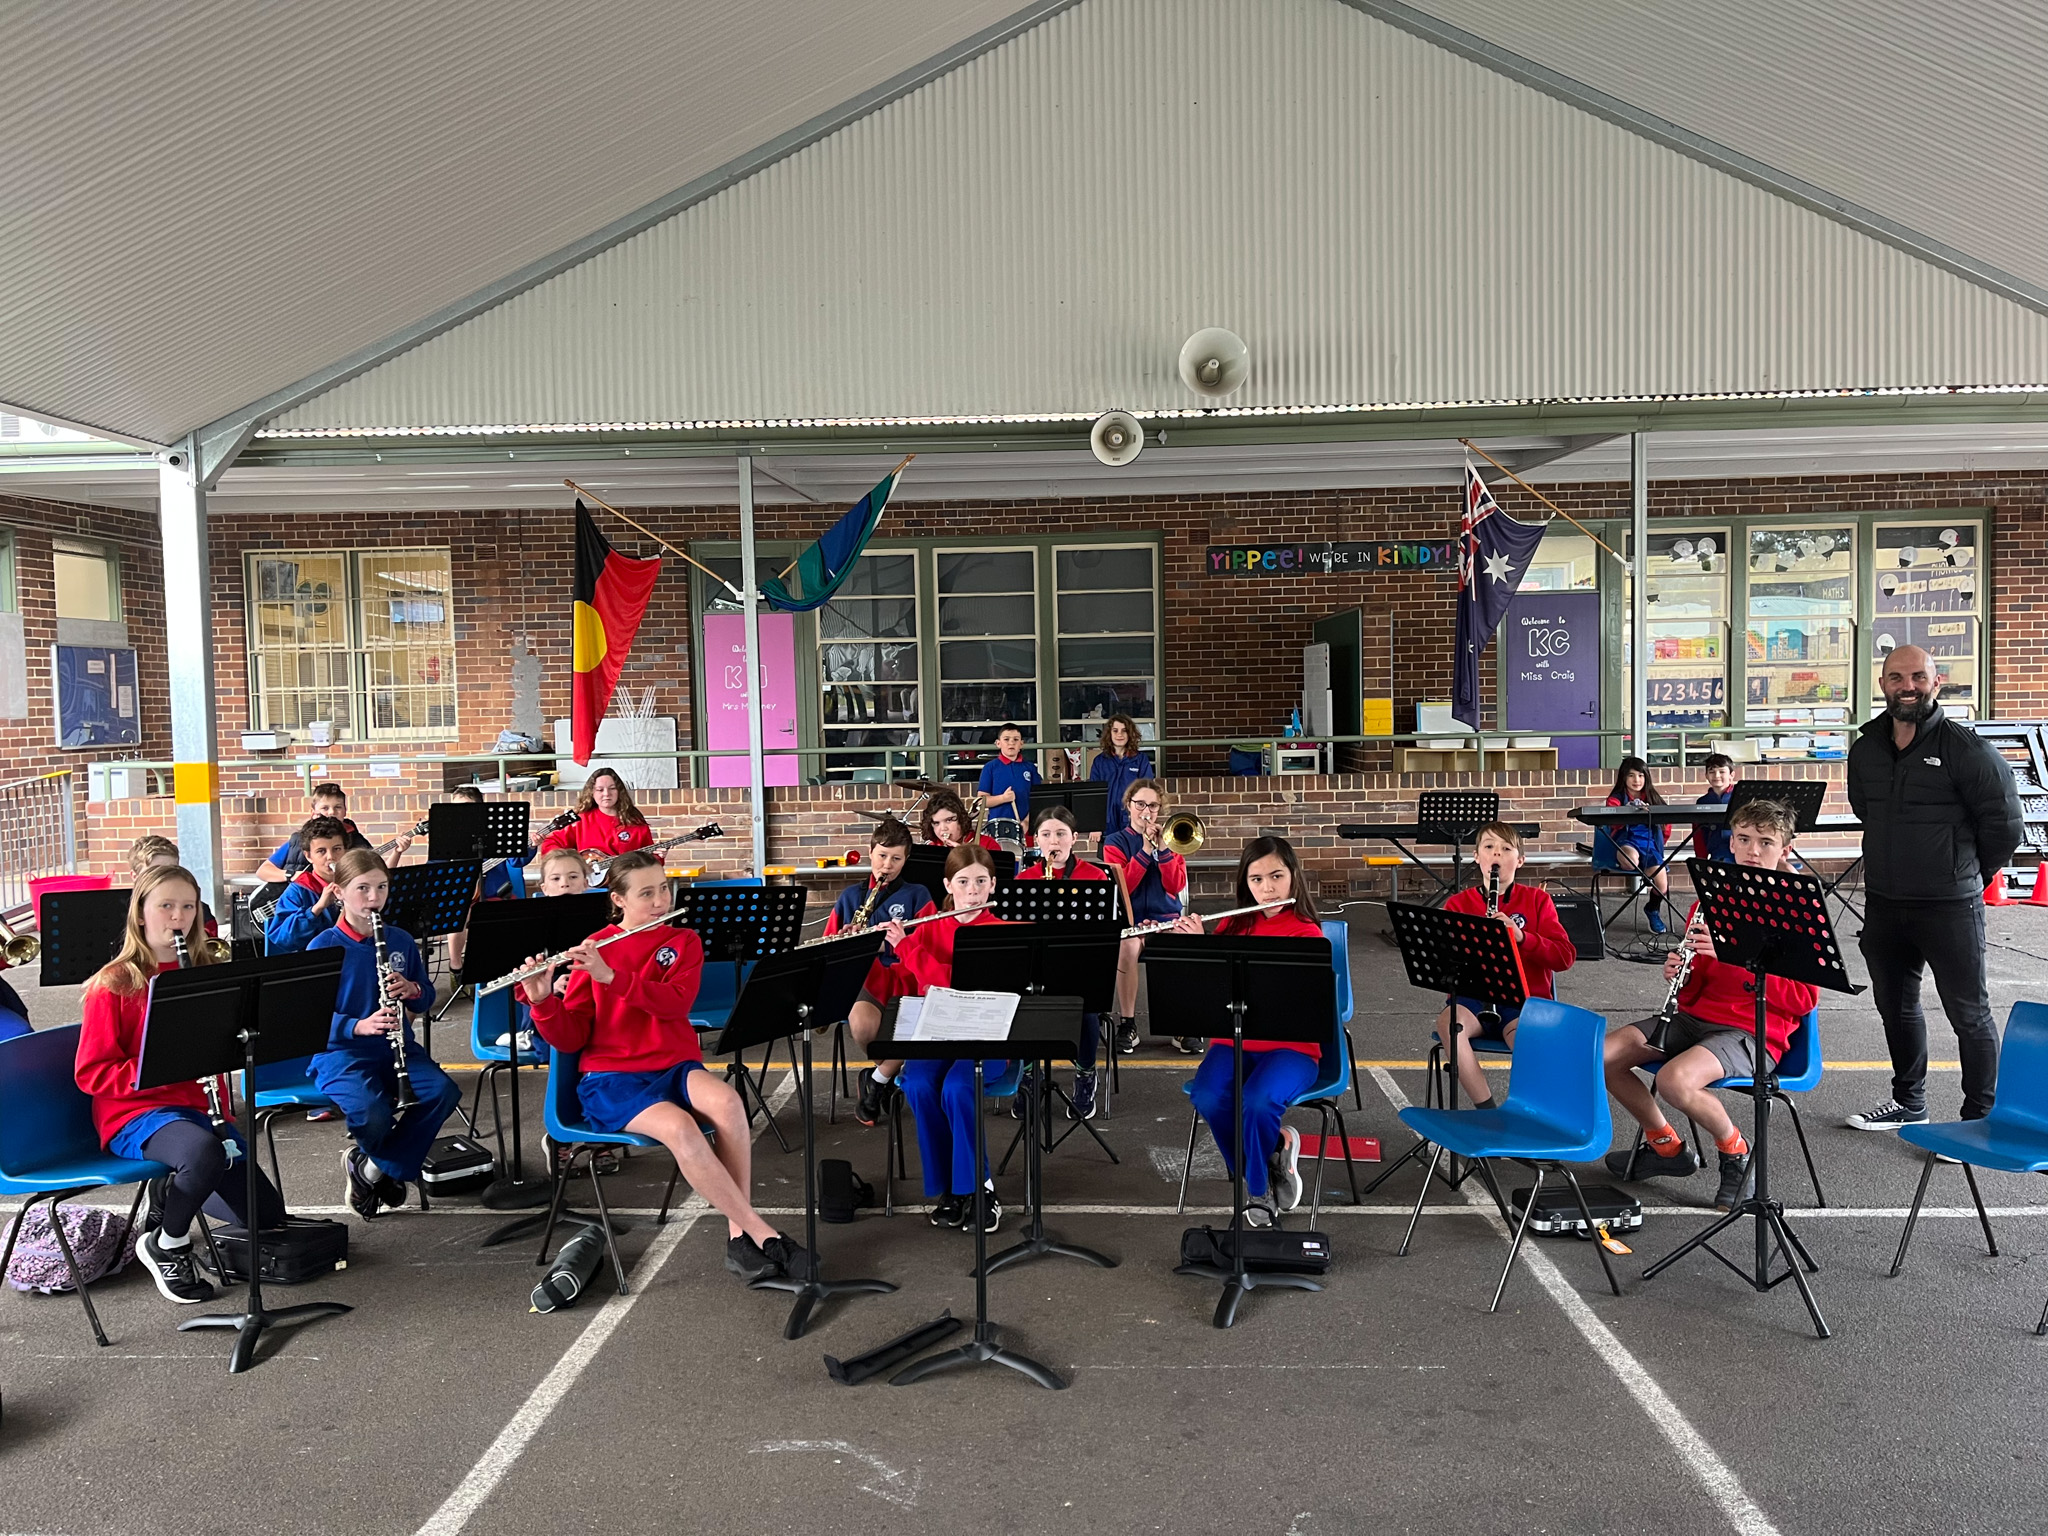 The school band playing under cover on the school playground.